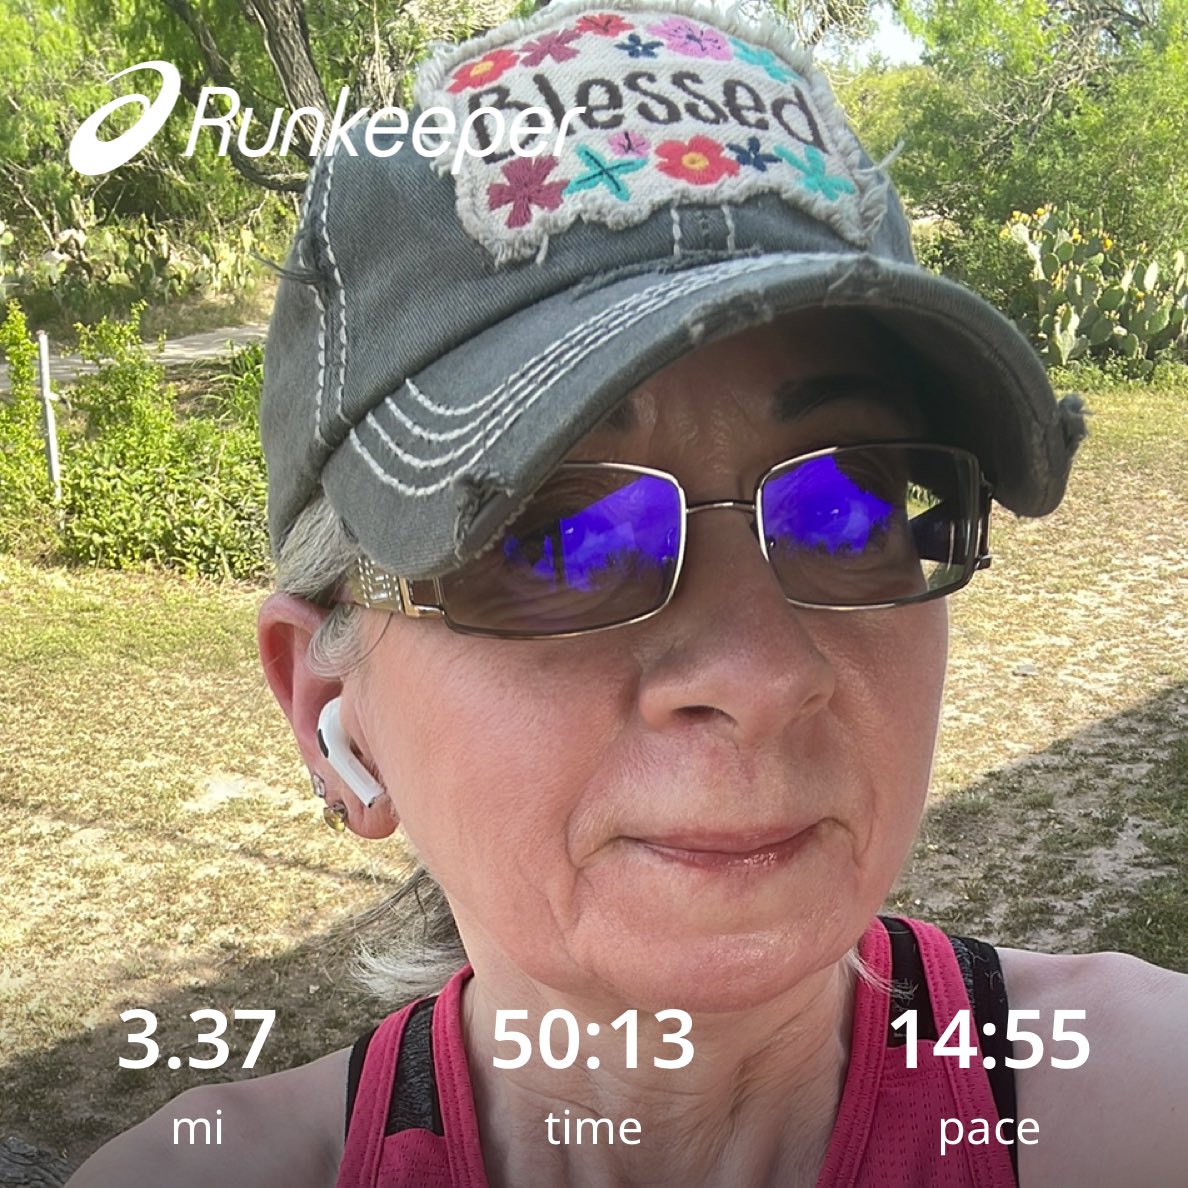 STROLLING SUNDAY! I’m rollin’, rollin’ strollin’ rawhide!!! lol. Got it done today. Trying to stay in Motion even on the weekends! Feeling great! #LoveMyFamily #FitnessFocus #WWLifetimer